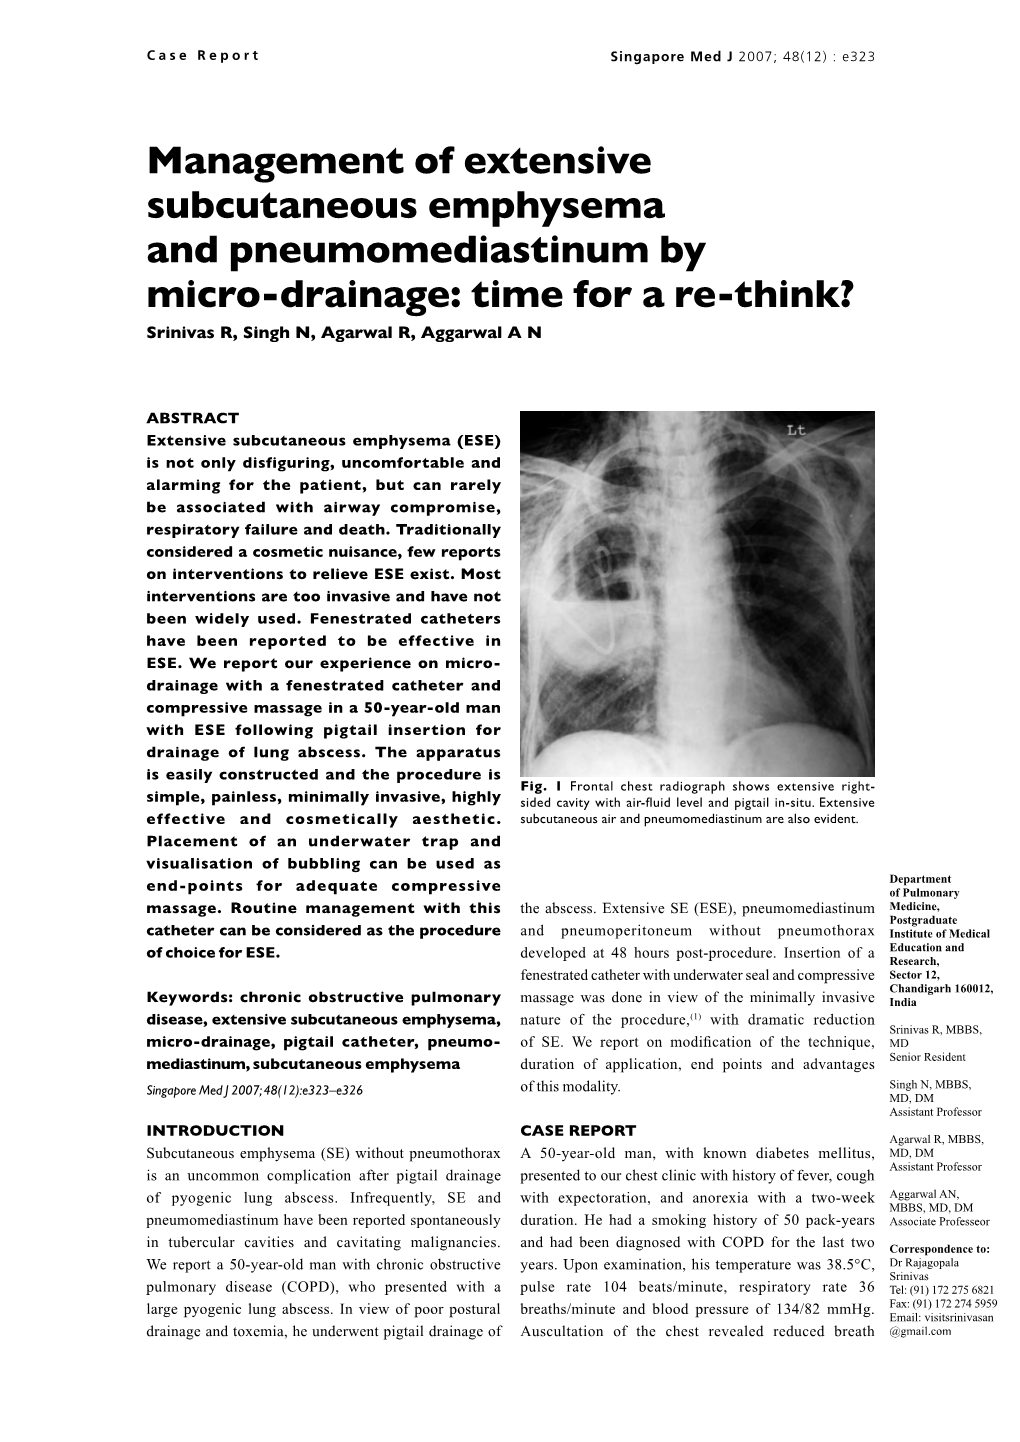 Management of Extensive Subcutaneous Emphysema and Pneumomediastinum by Micro-Drainage